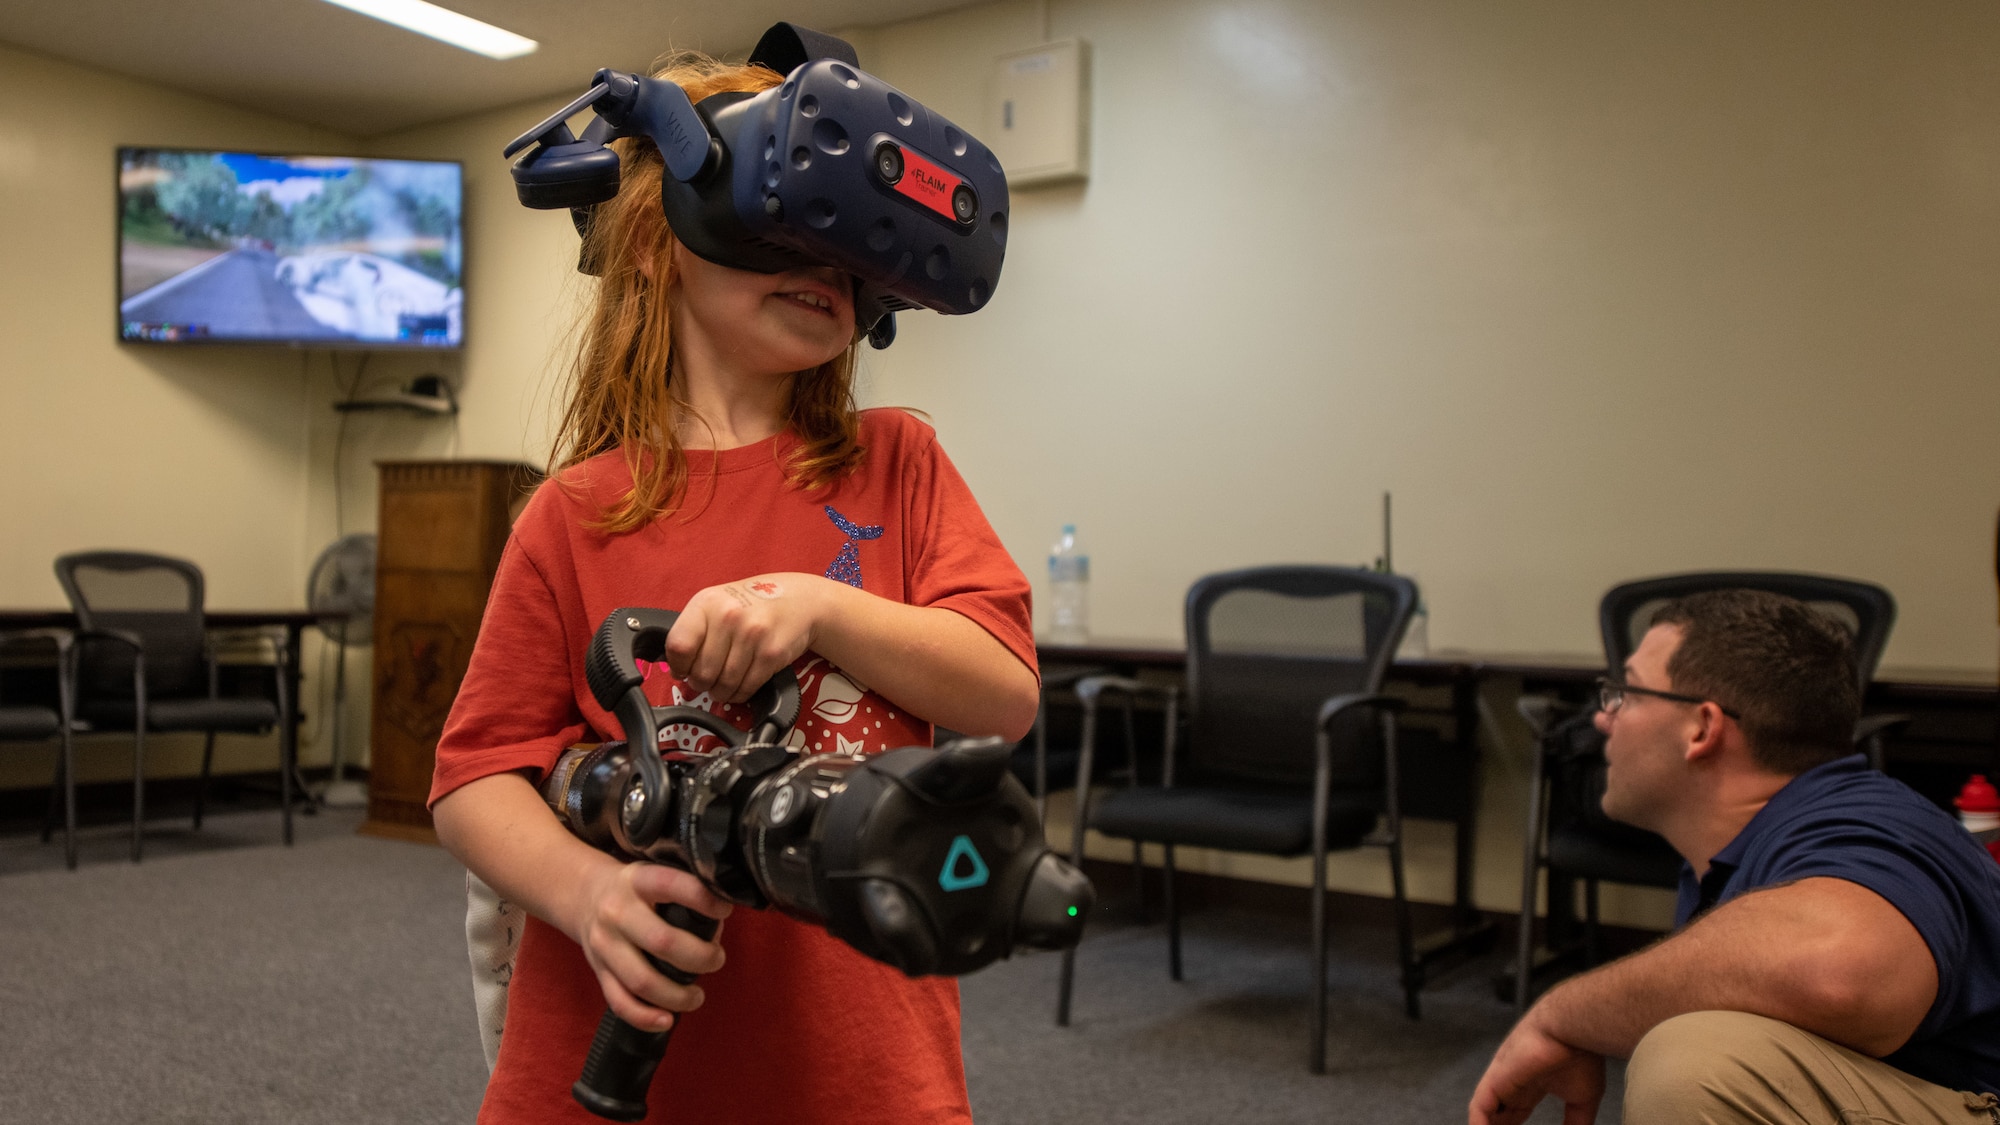 Child uses Virtual Reality system